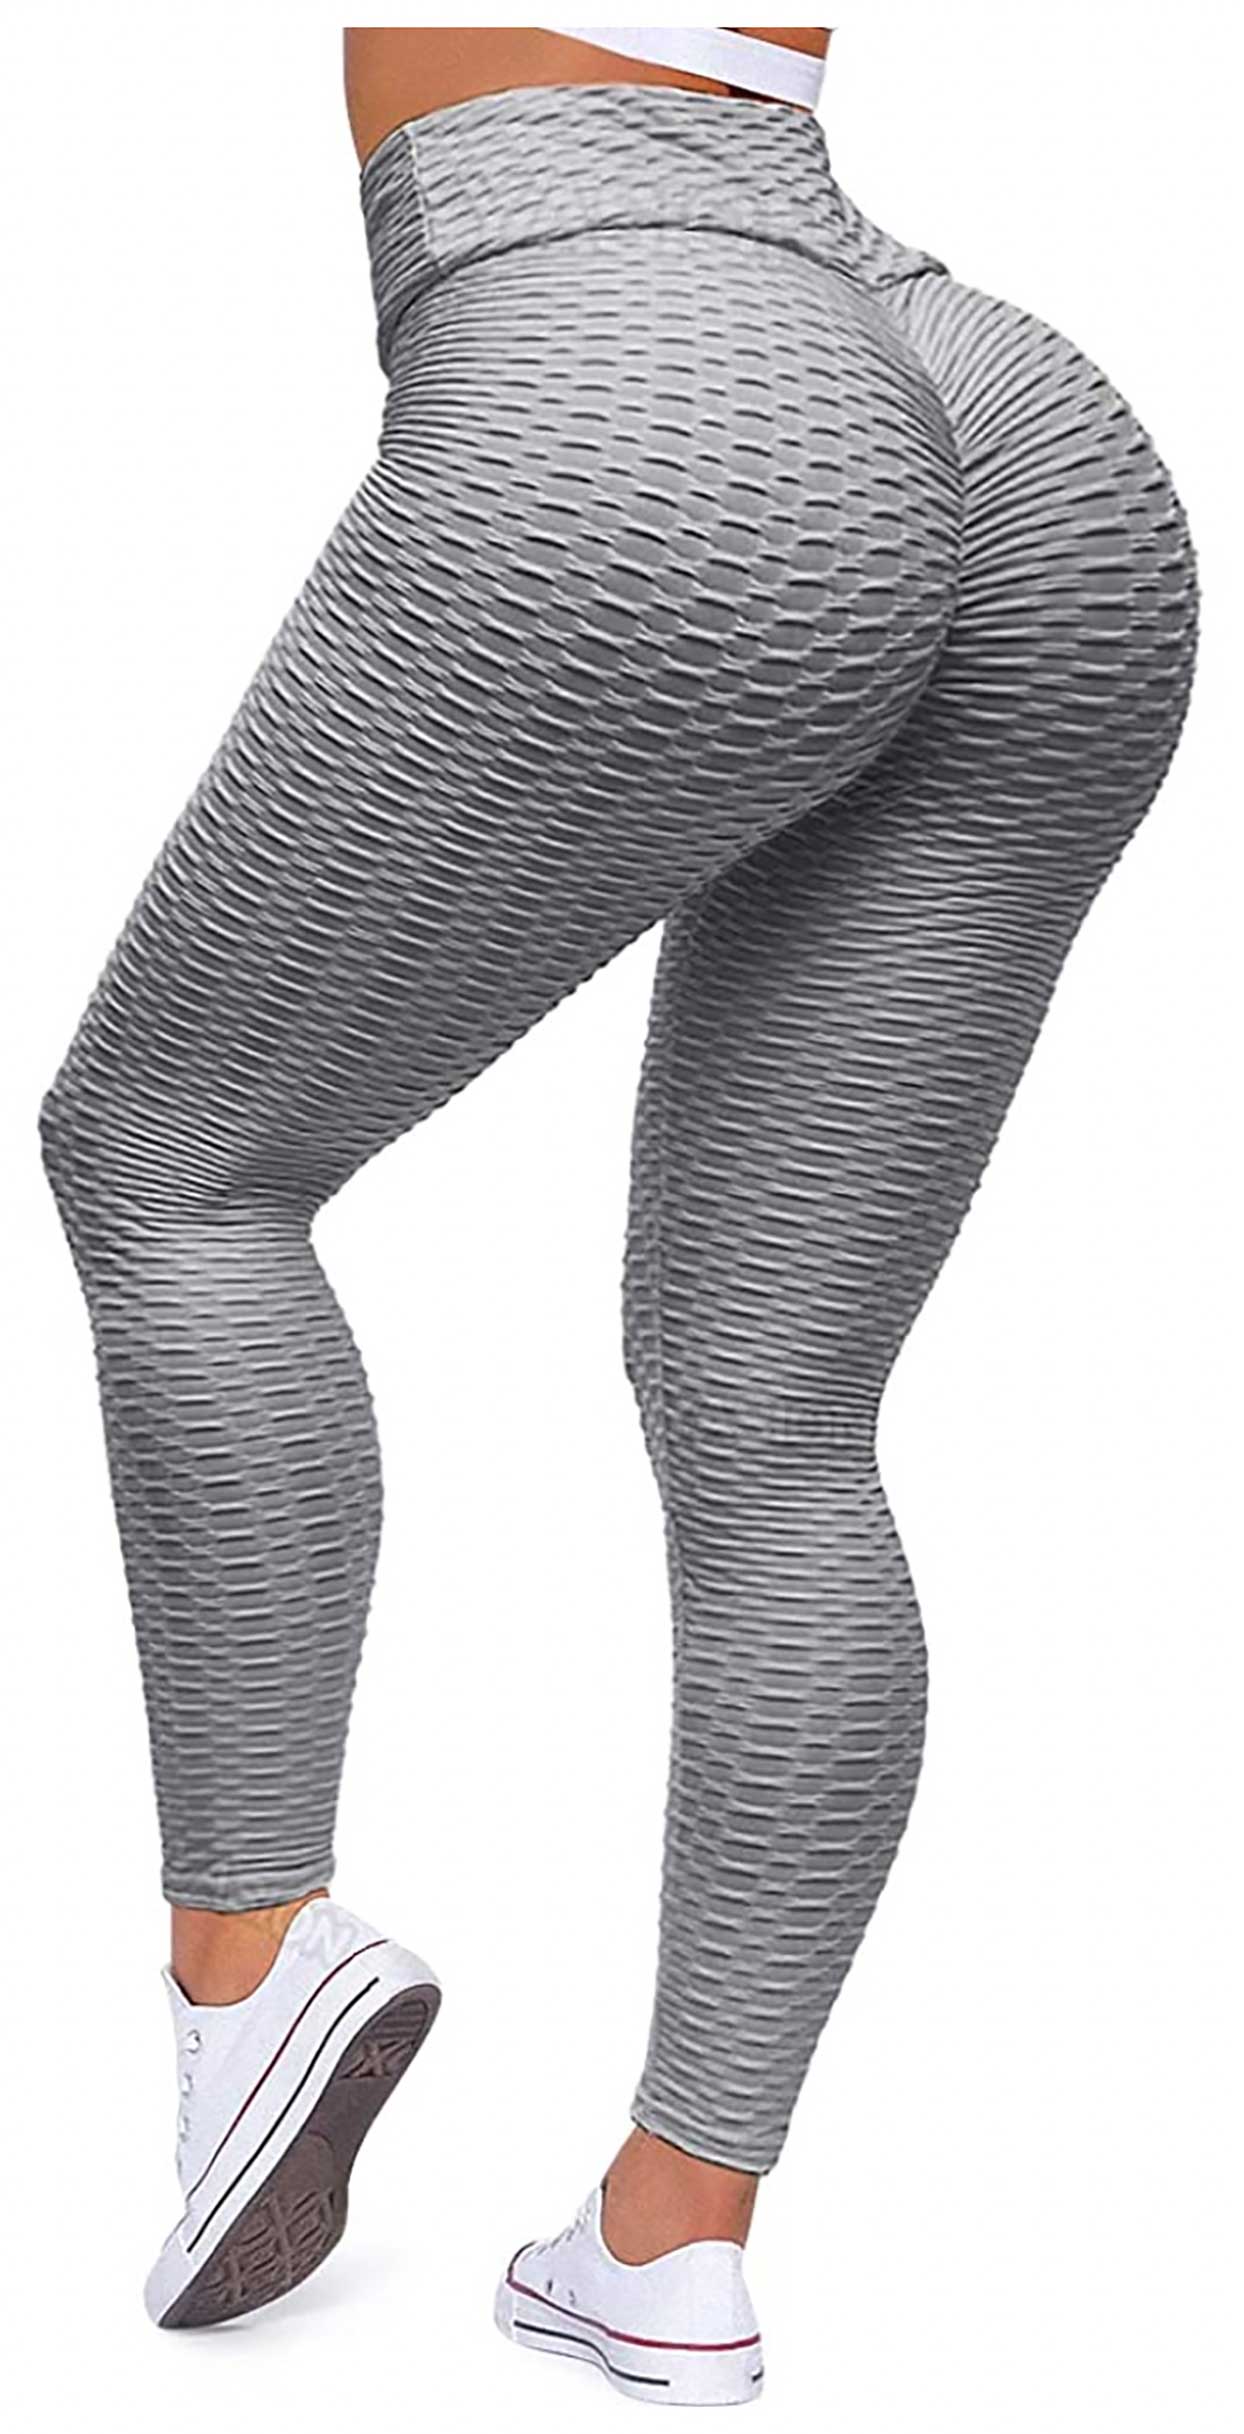 textured workout pants with butt lift enhanced functionality